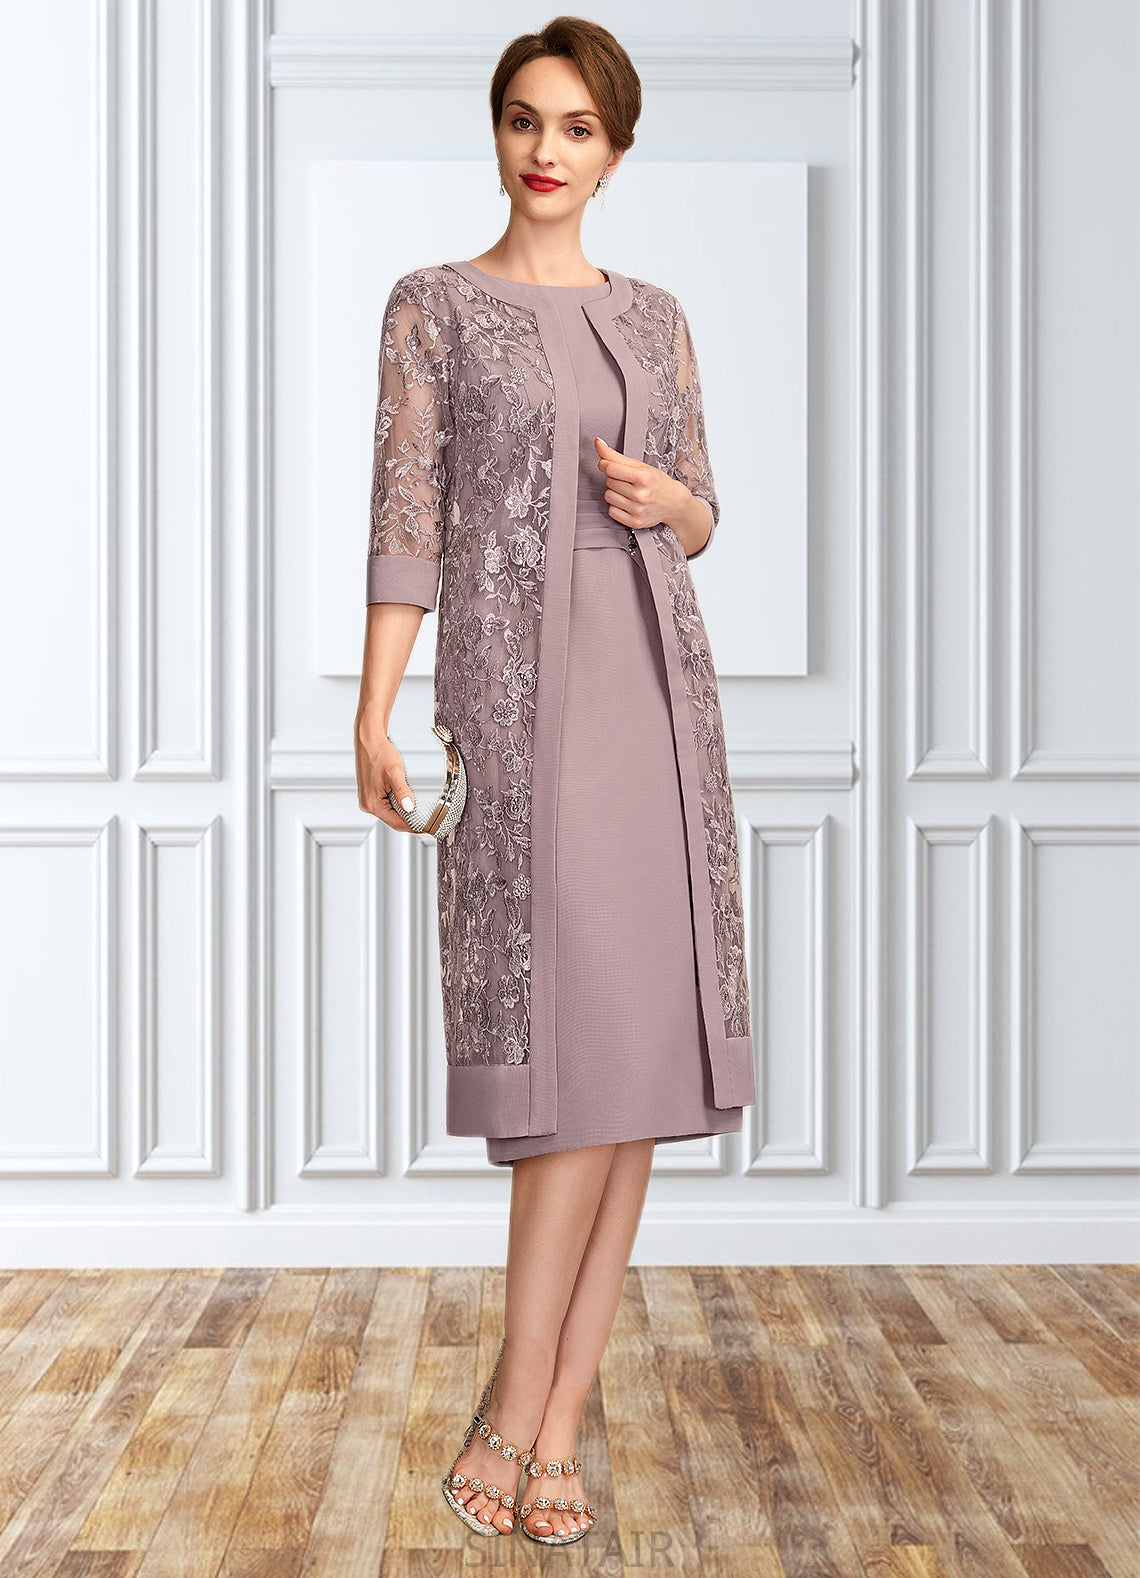 Shyanne Sheath/Column Scoop Neck Knee-Length Chiffon Mother of the Bride Dress With Ruffle Sequins DH126P0015023